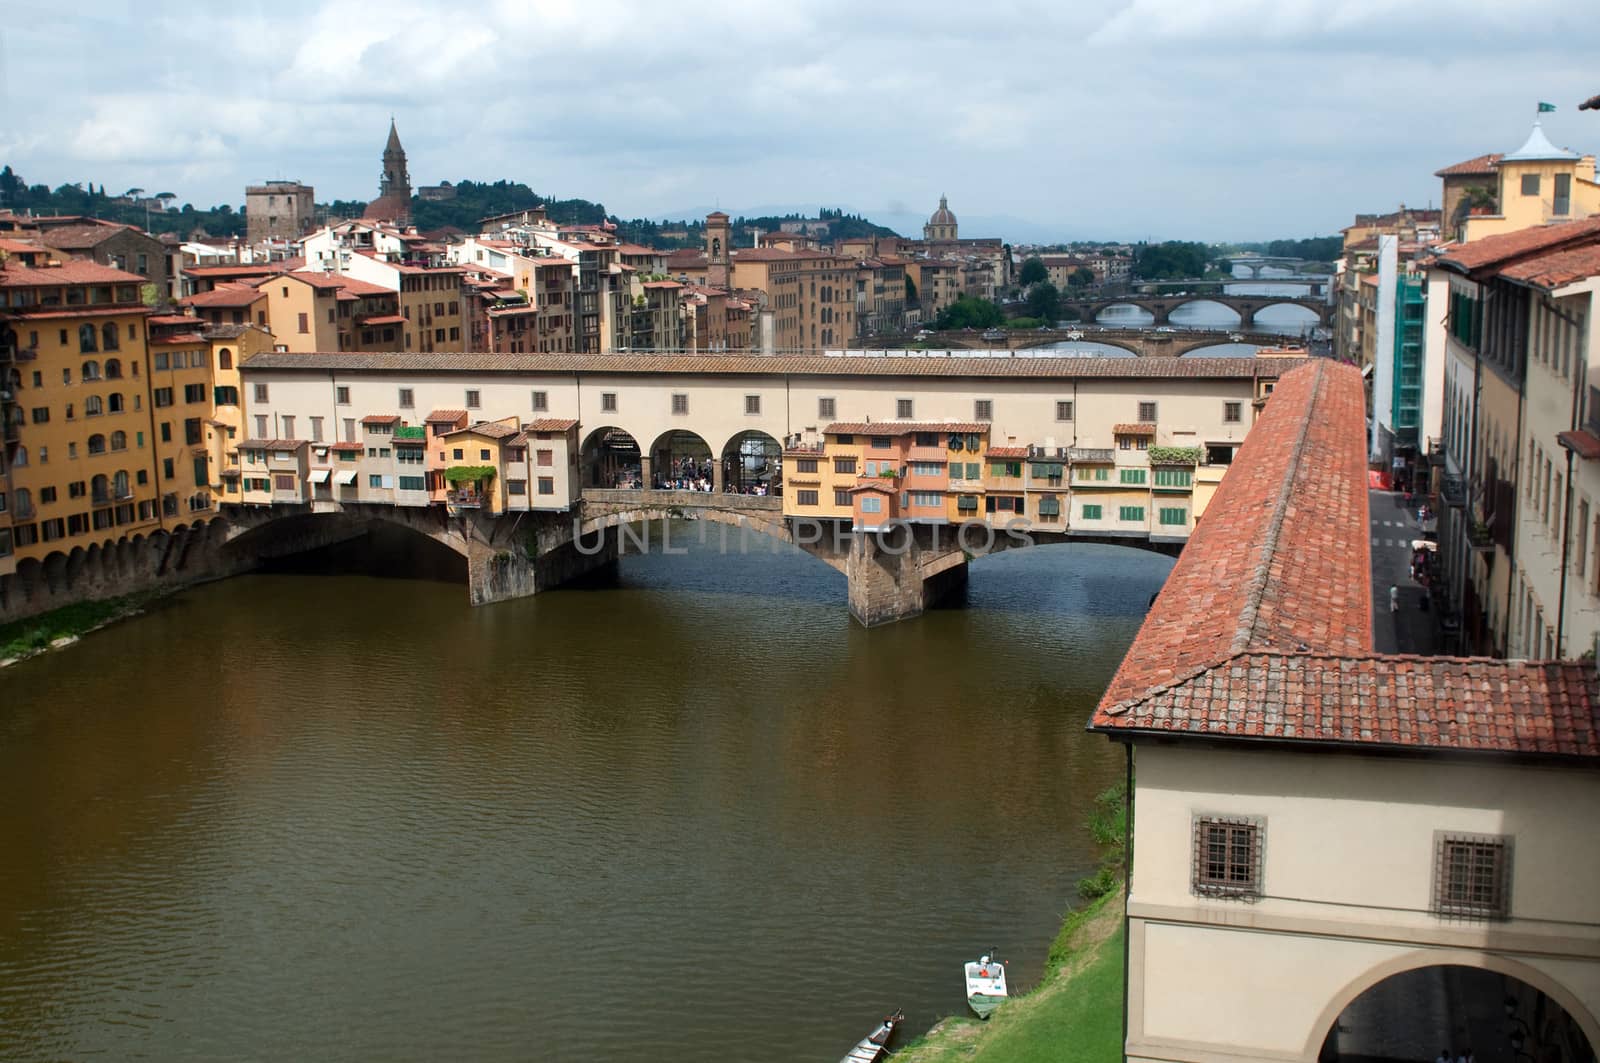 The Ponte Vecchio ("Old Bridge") is a Medieval bridge over the Arno River in Florence, Tuscany, Italy.